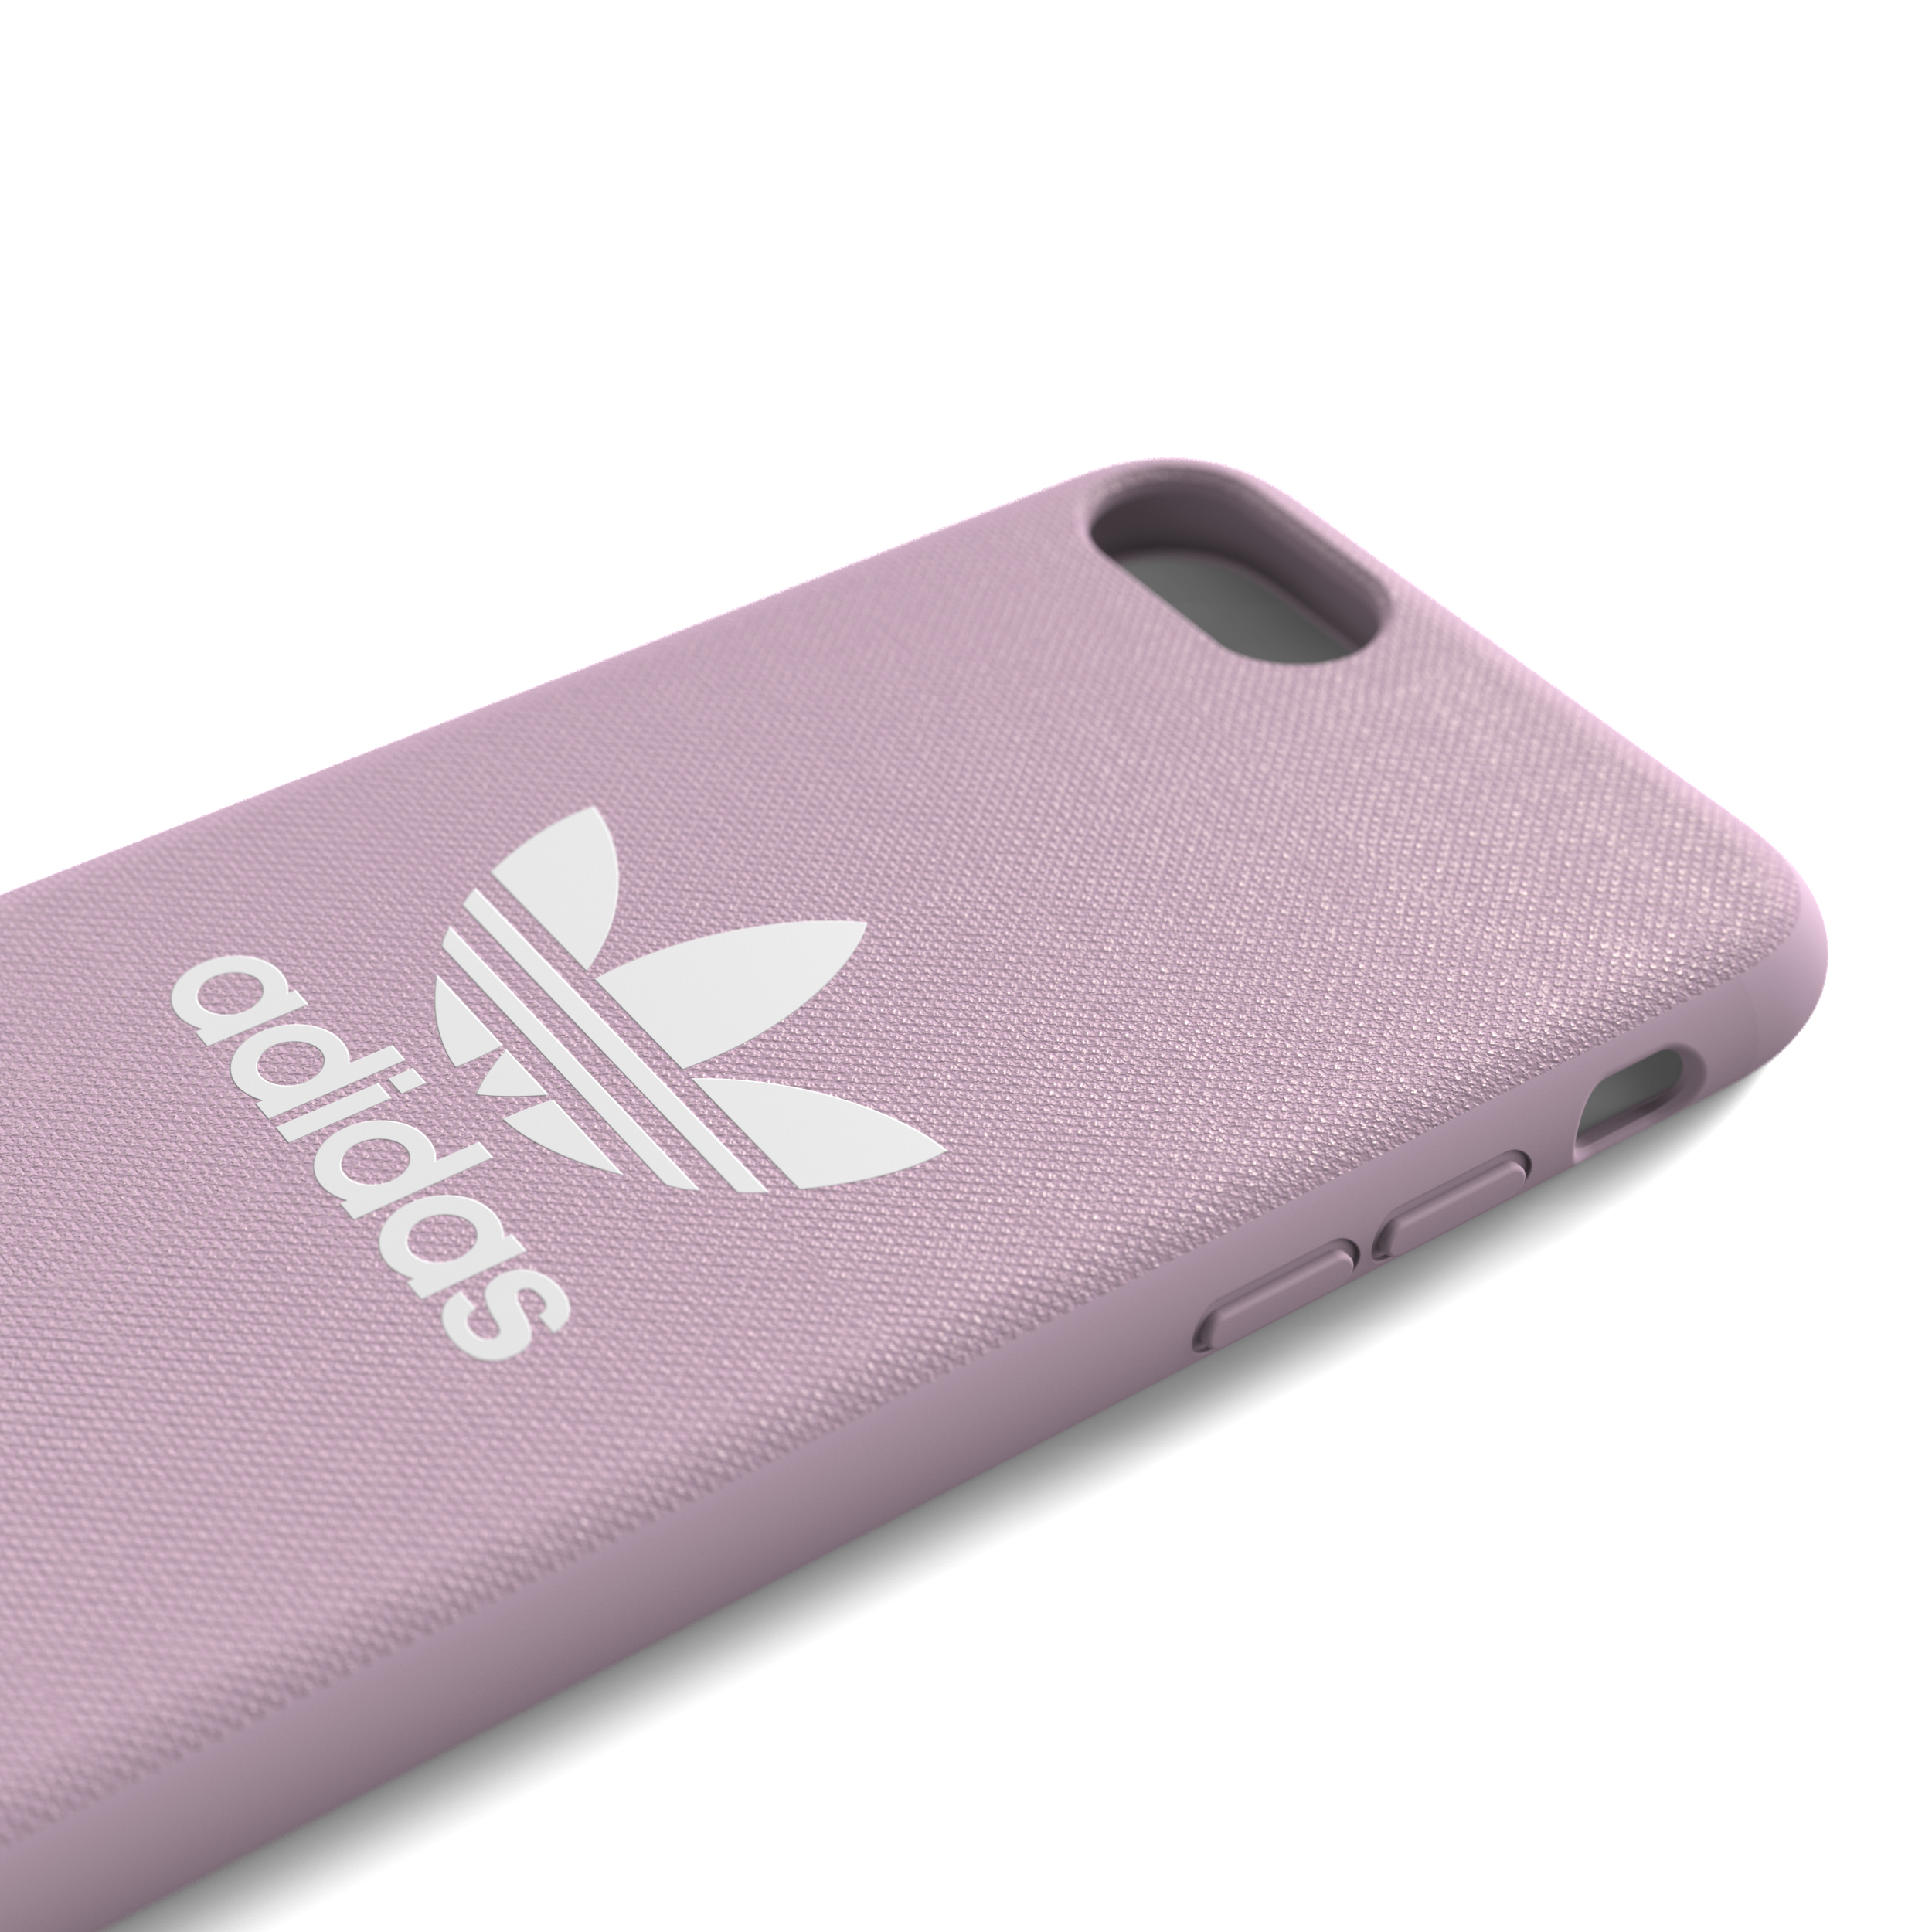 ADIDAS ORIGINALS OR Moulded 6, Rosa Backcover, Apple, iPhone 8, iPhone Case, 7, (2020), iPhone iPhone SE